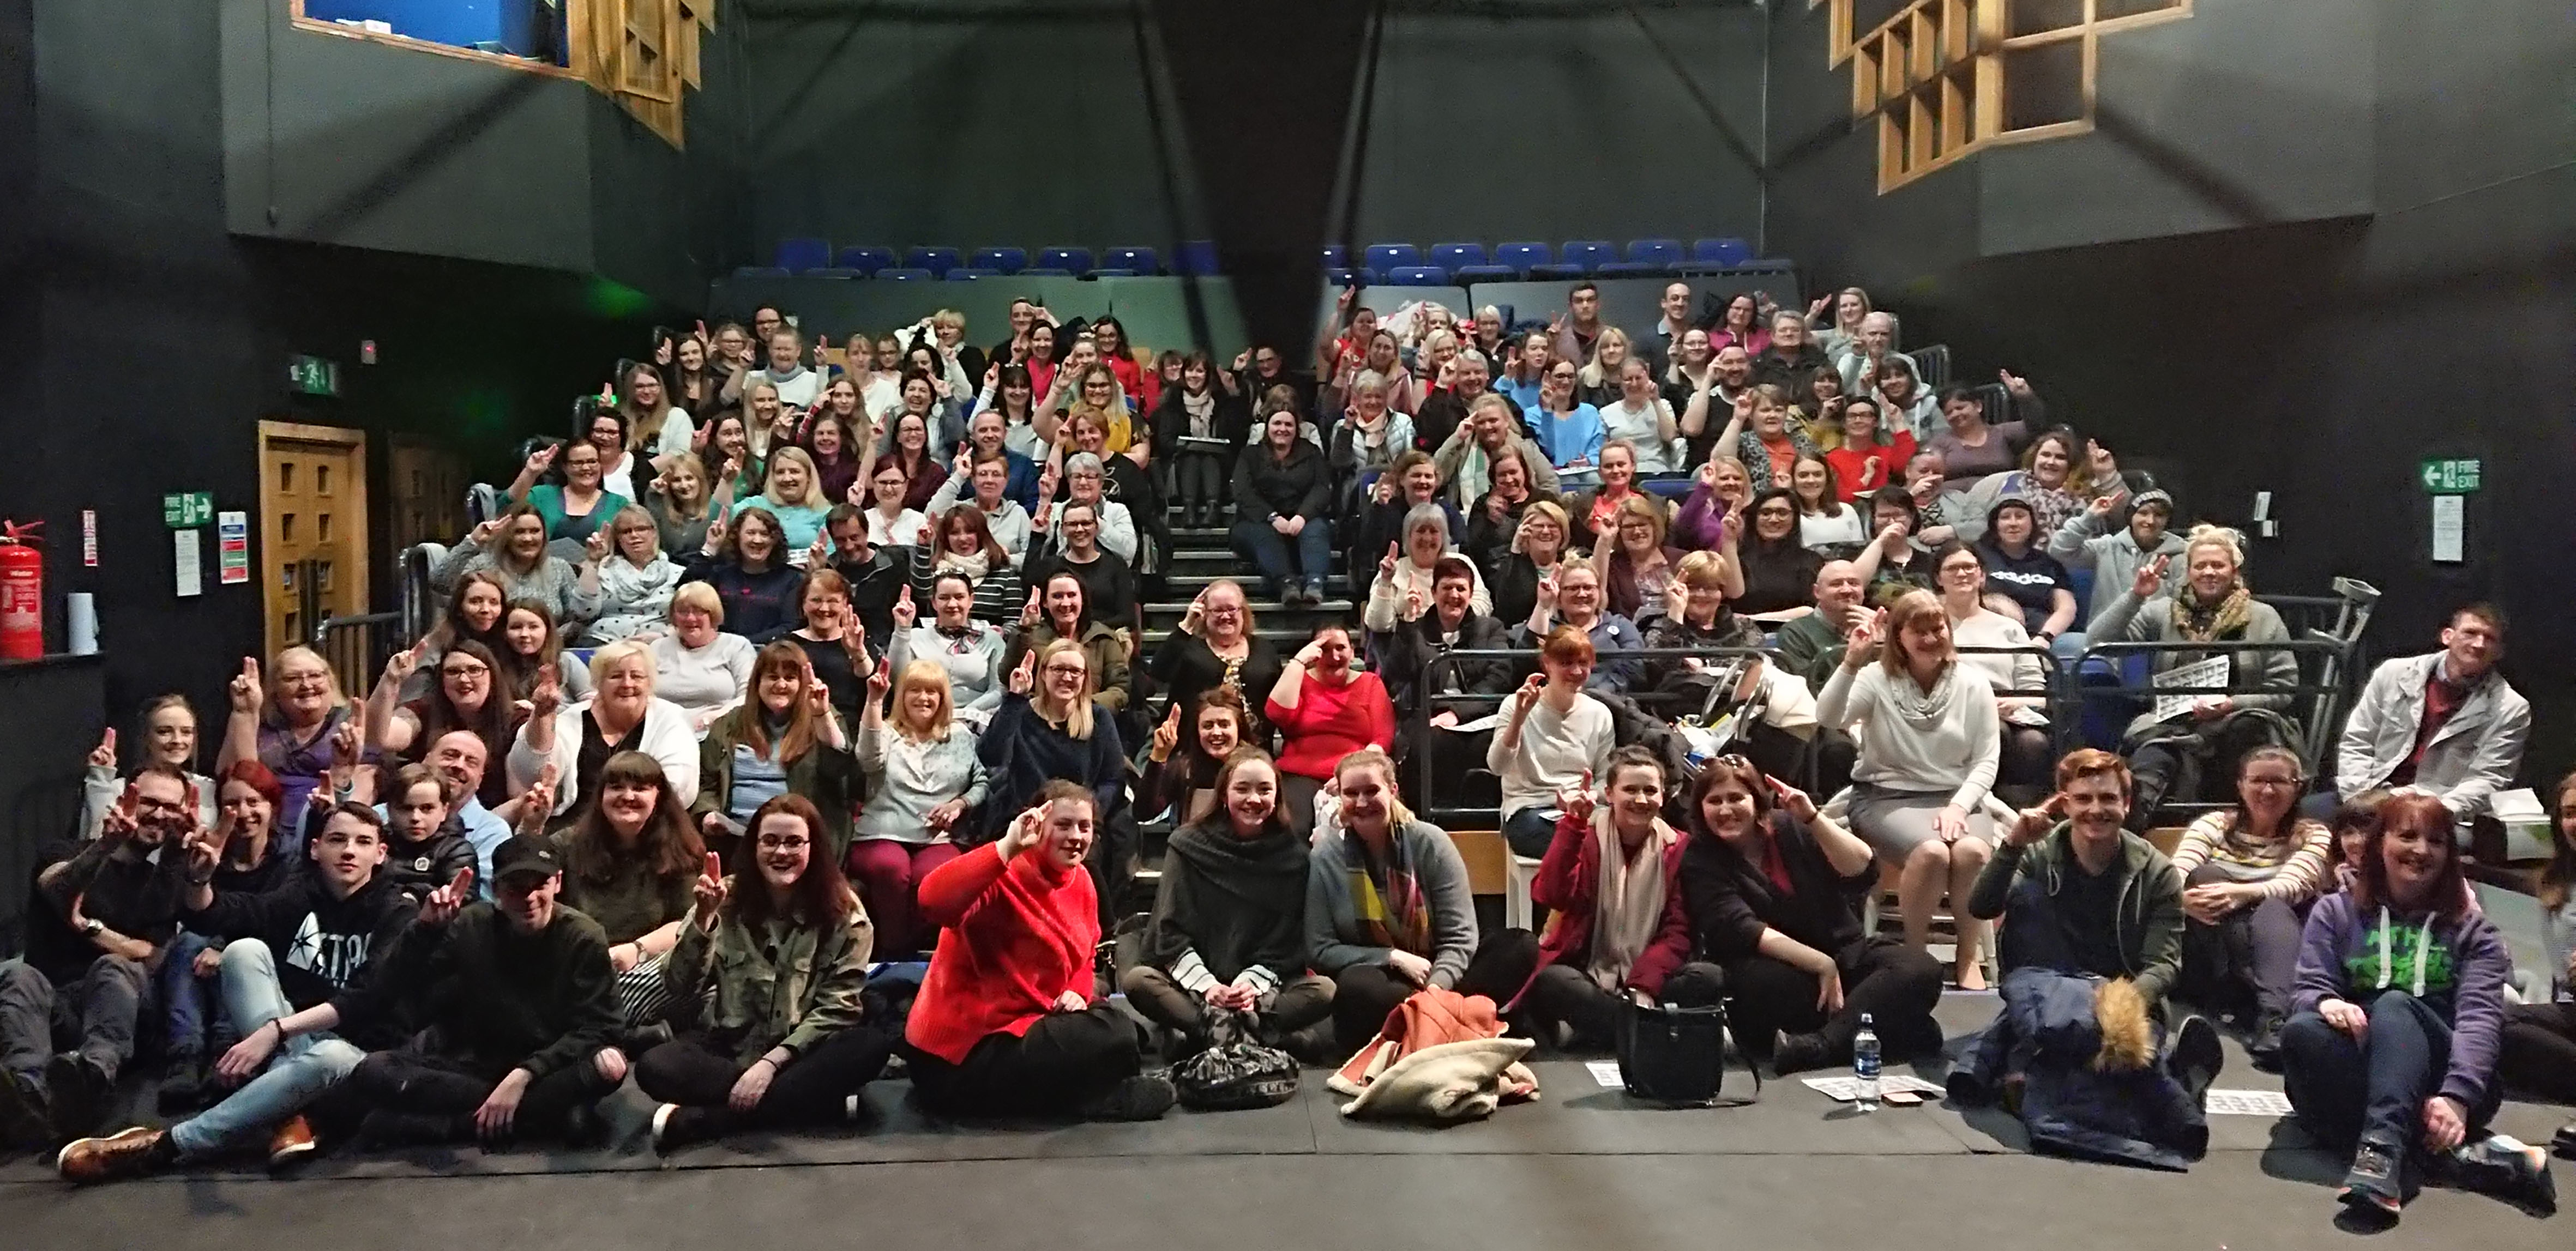 Scores of people came along to the Paisley Arts Centre’s Sign Language Club